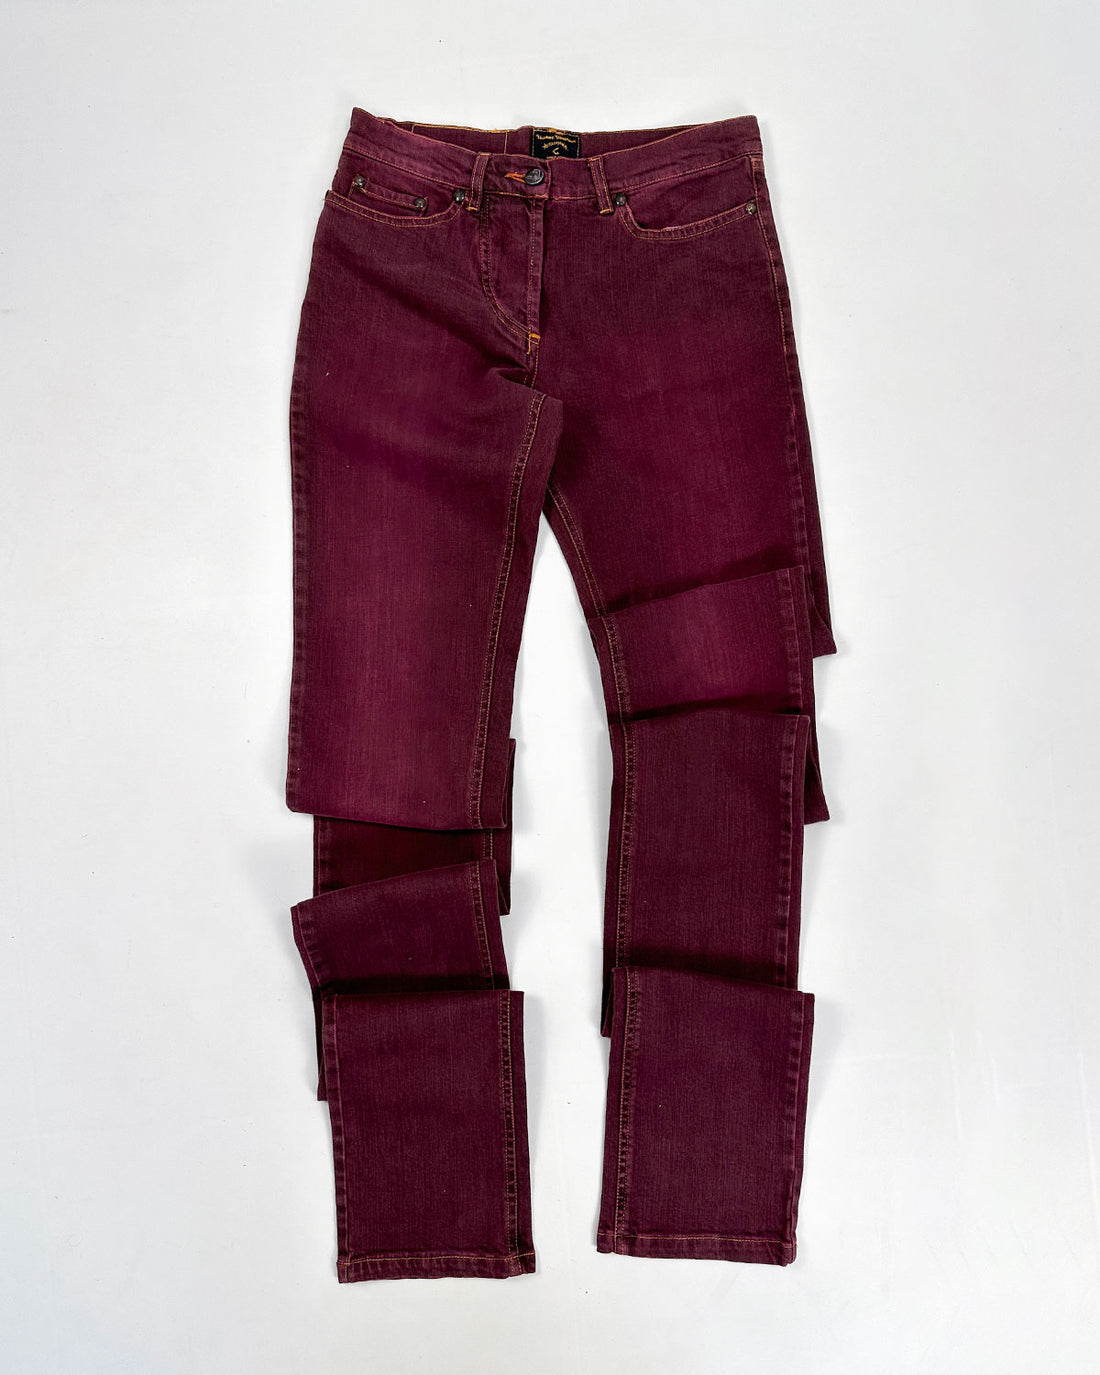 Vivienne Westwood Anglomania Extra-Long Burgundy Pants 1990's